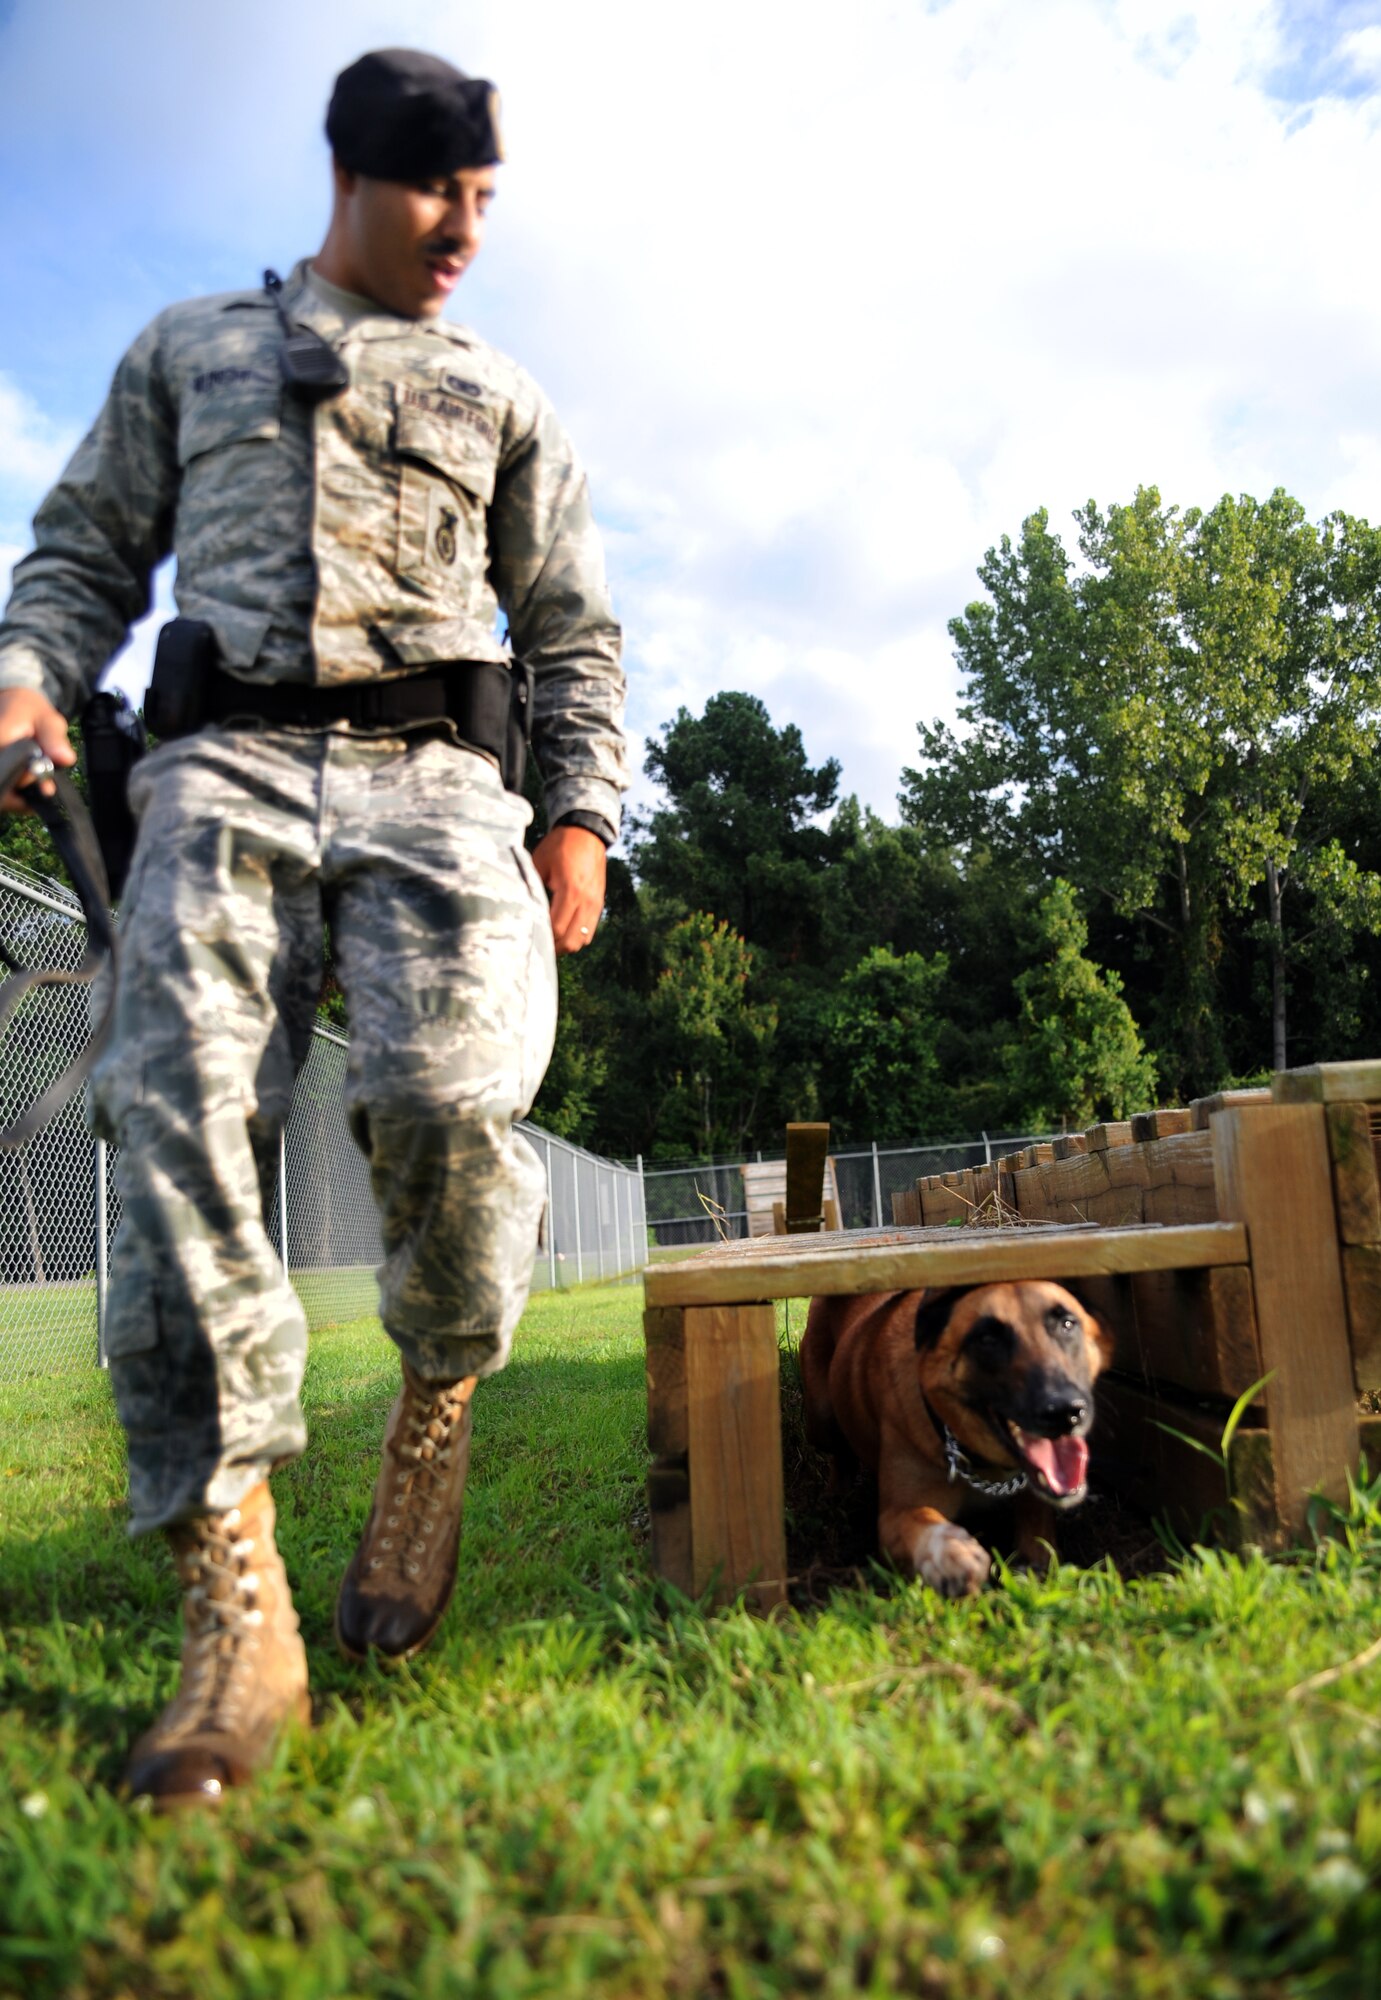 U.S. Air Force Staff Sgt. Munshi coaxes his military working dog Arton to crawl through a tunnel on the obedience obstacle course at the MWD compound Aug. 20, 2010, on Joint Base Charleston, S.C. MWDs are trained to be comfortable navigating through tight spaces, such as culverts, tunnels and other likely obstacles. Sergeant Munshi is a dog handler with the 628th Security Forces Squadron. (U.S. Air Force photo/Senior Airman Timothy Taylor)